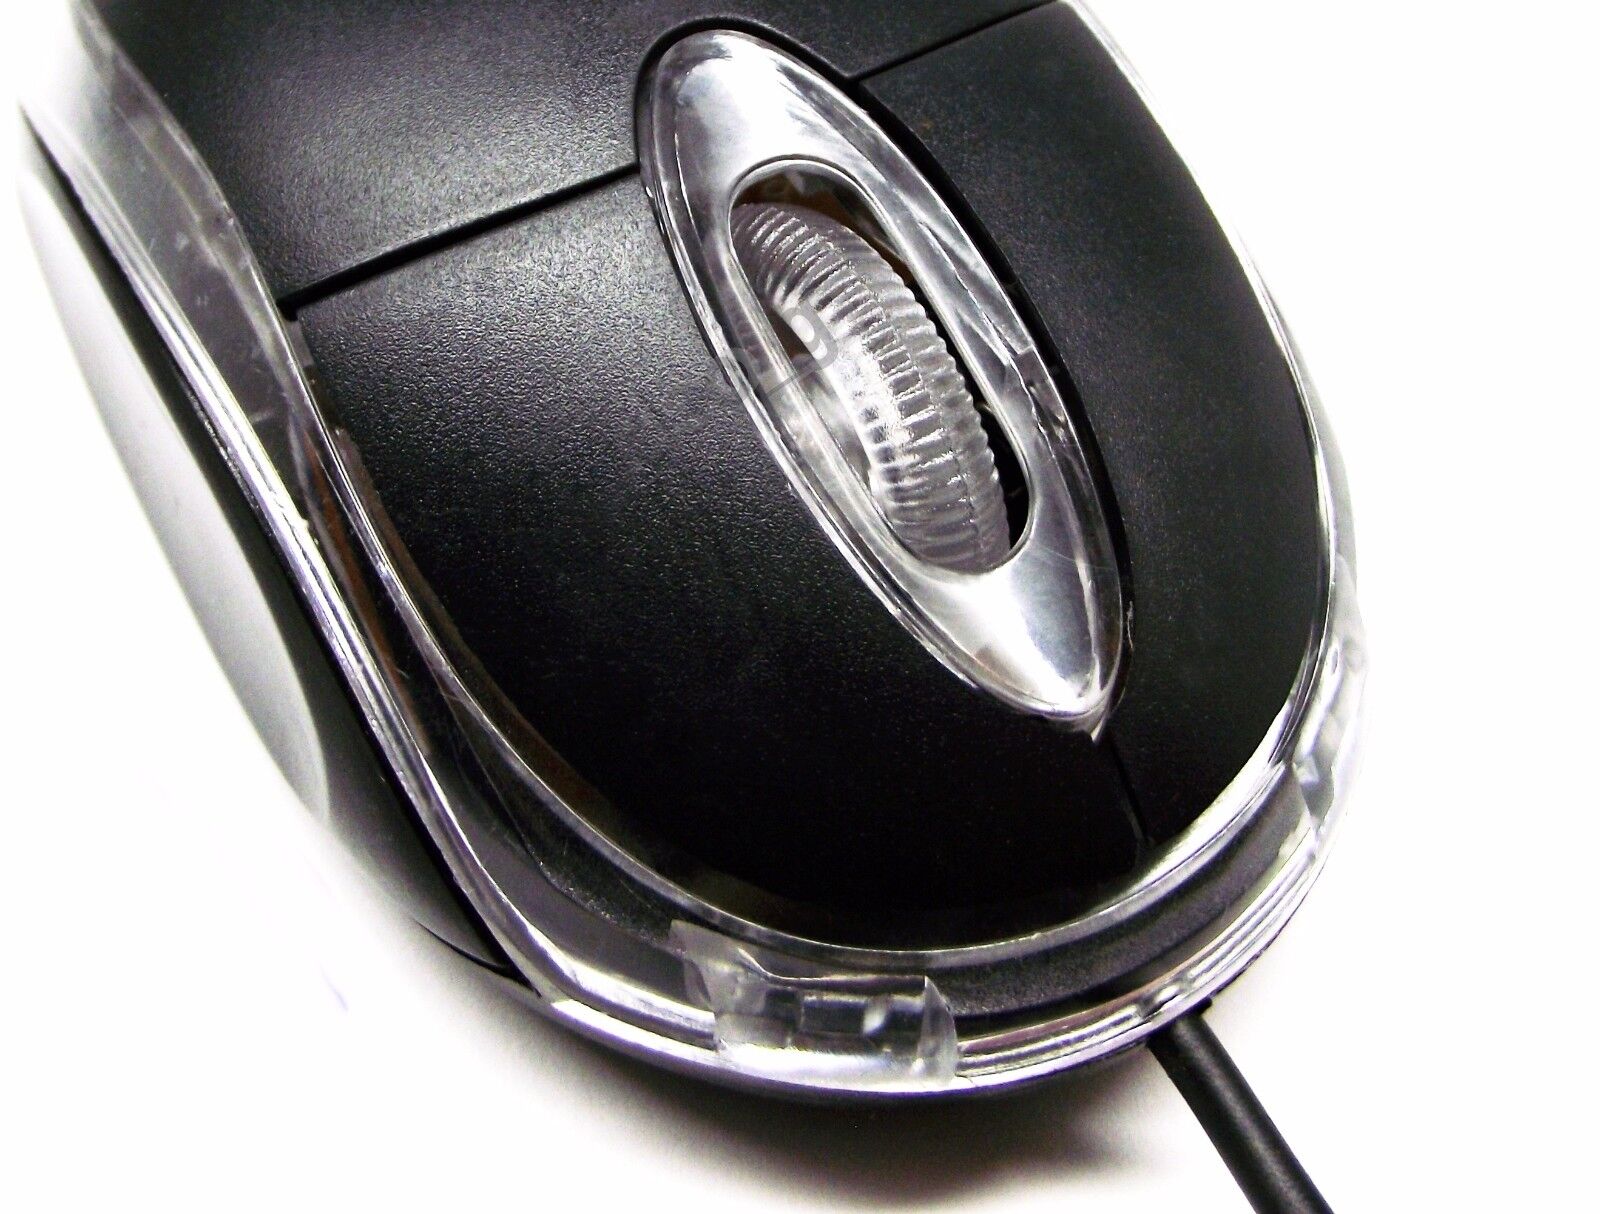 From Oz Quality 1PC USB Mouse Optical Comfy On Hand Wrist Simple Wired 4 Laptop